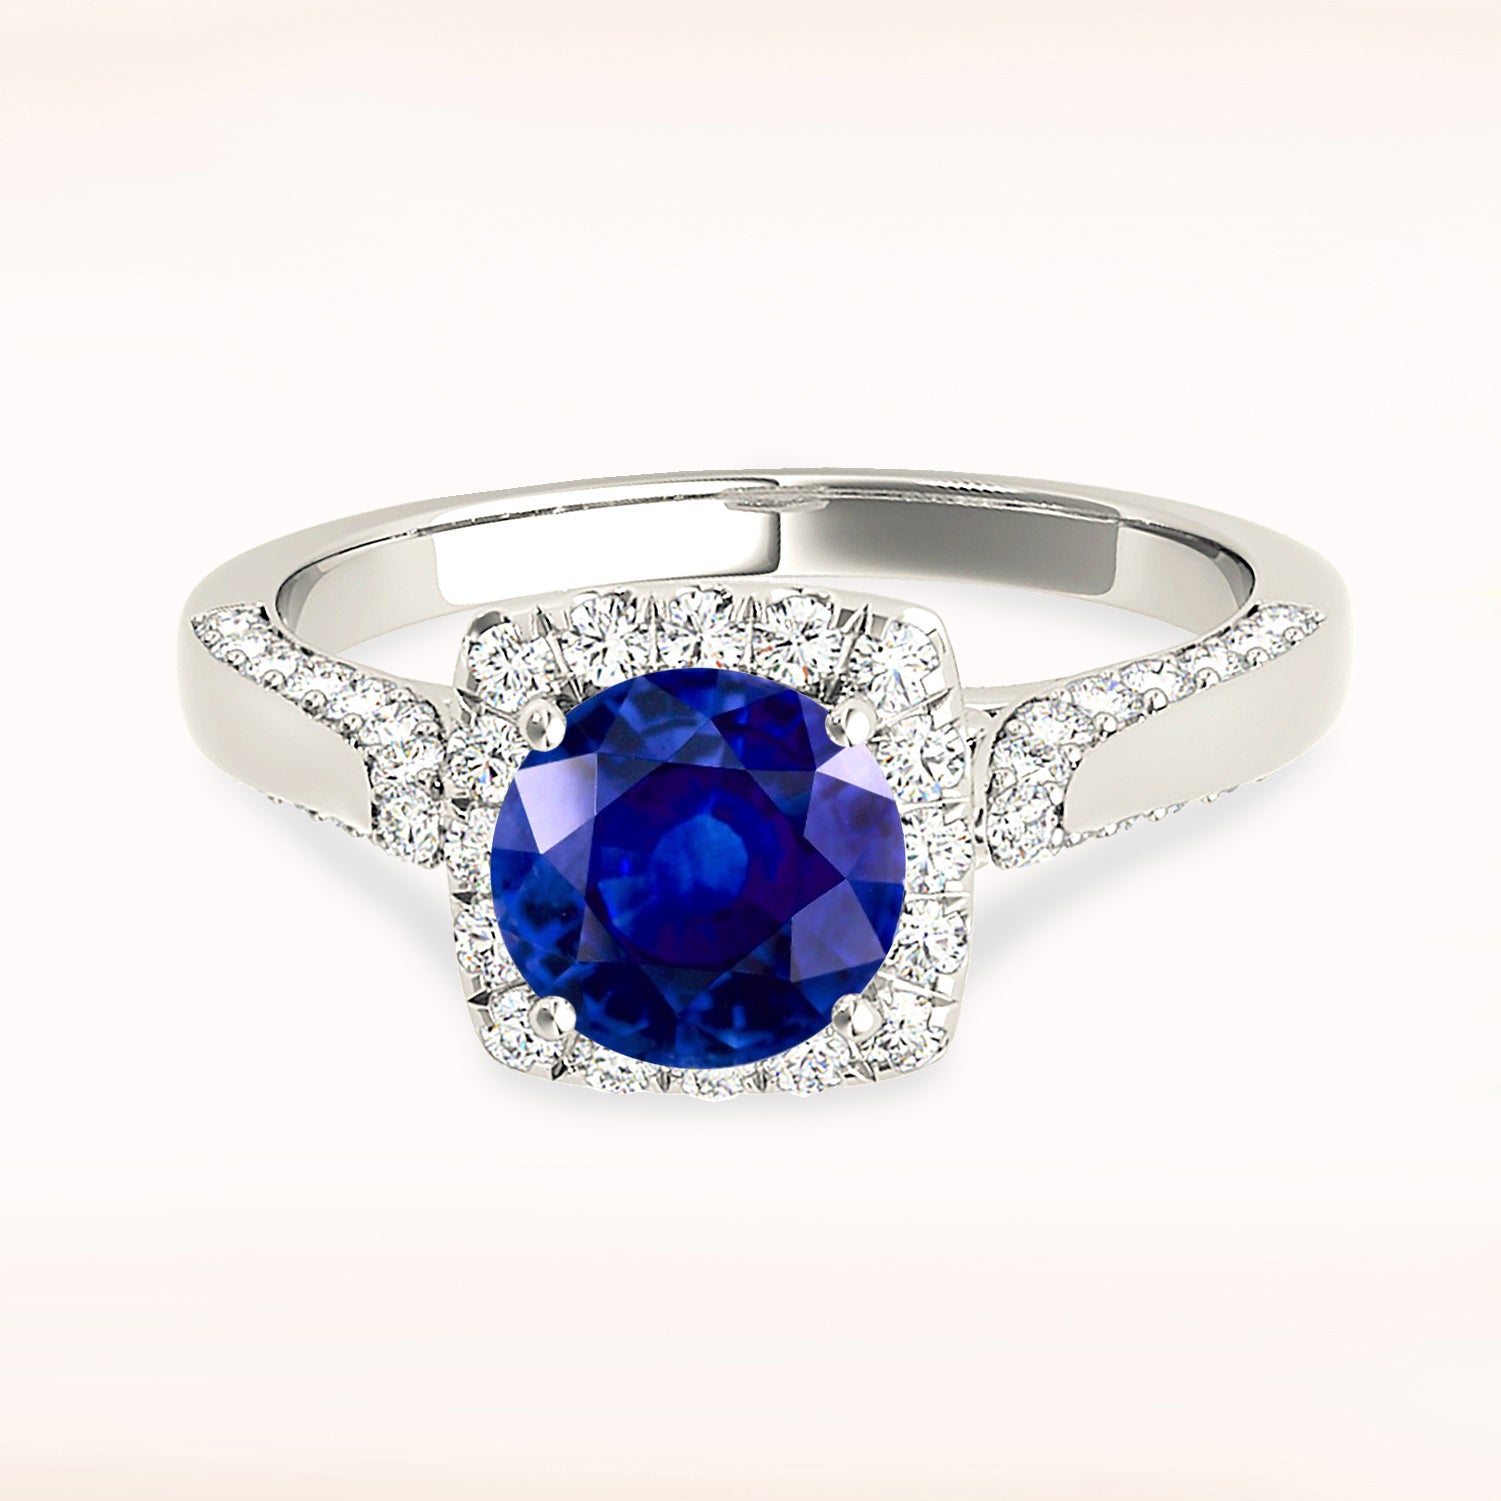 1.80 ct. Genuine Blue Sapphire Halo Engagement Ring With 0.55 ctw. Side and Accent Diamonds-in 14K/18K White, Yellow, Rose Gold and Platinum - Christmas Jewelry Gift -VIRABYANI